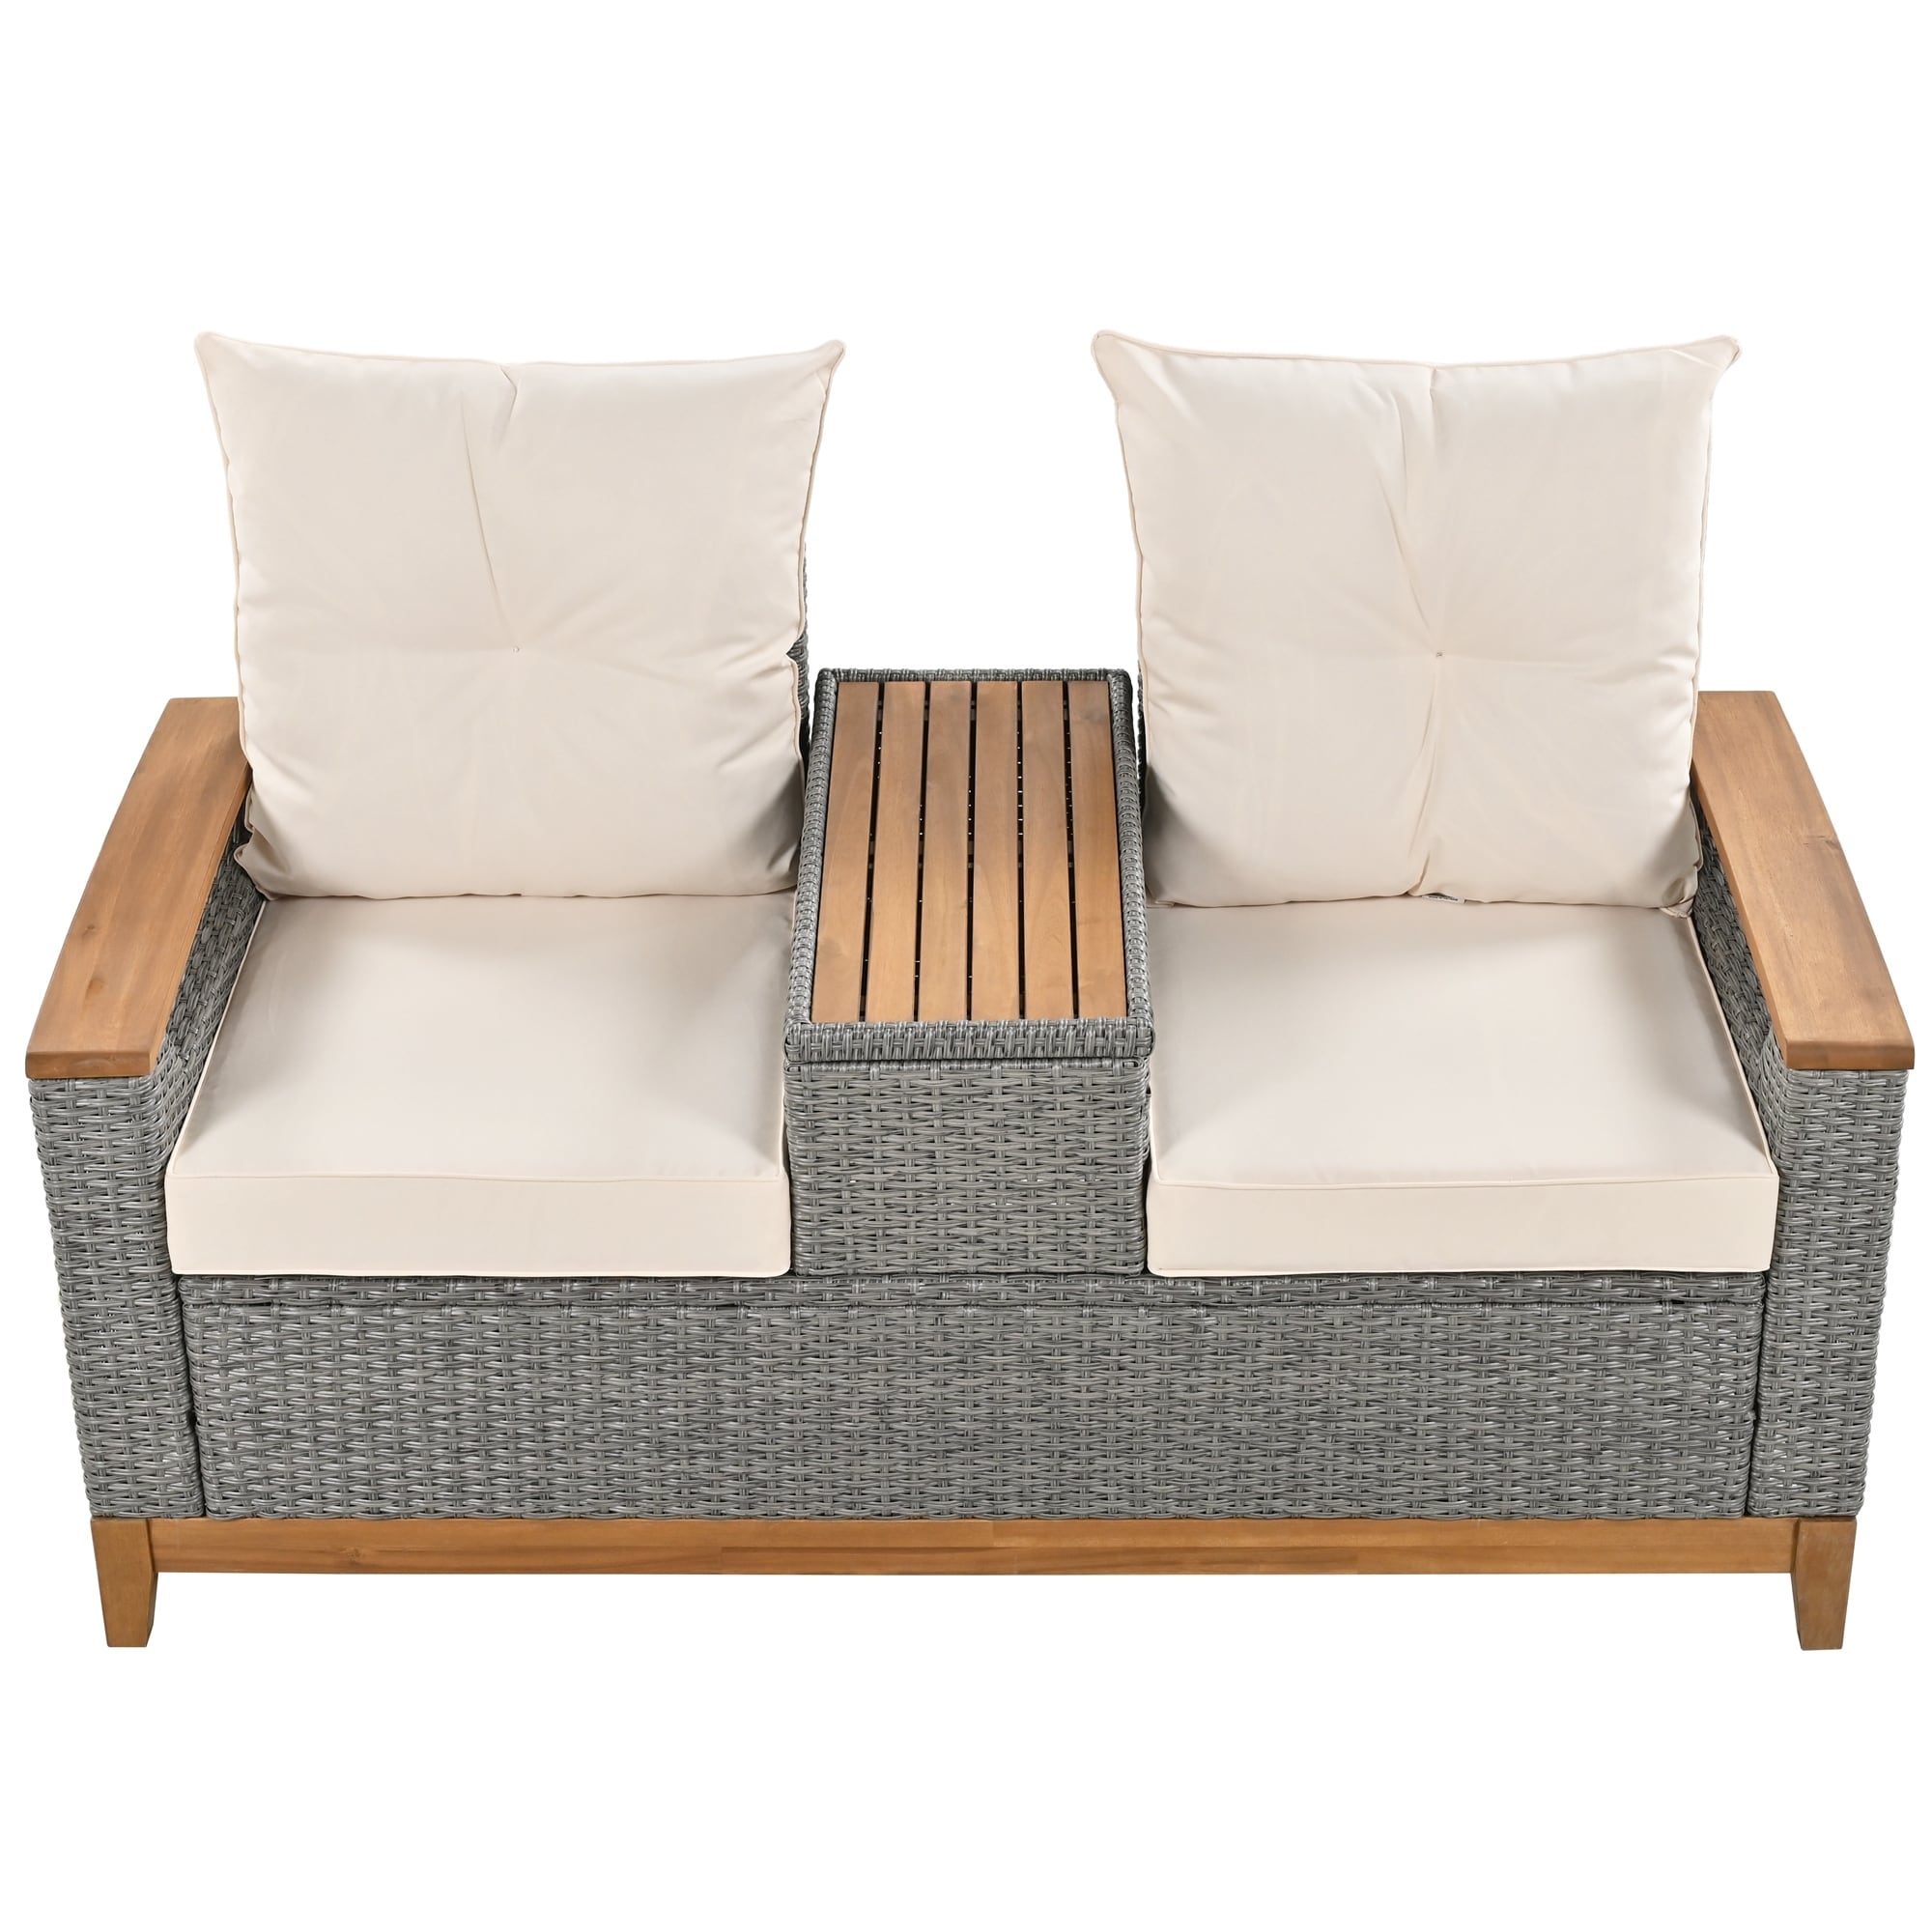 Outdoor Adjustable Armrest Loveseat With Storage Space And Removable Cushion